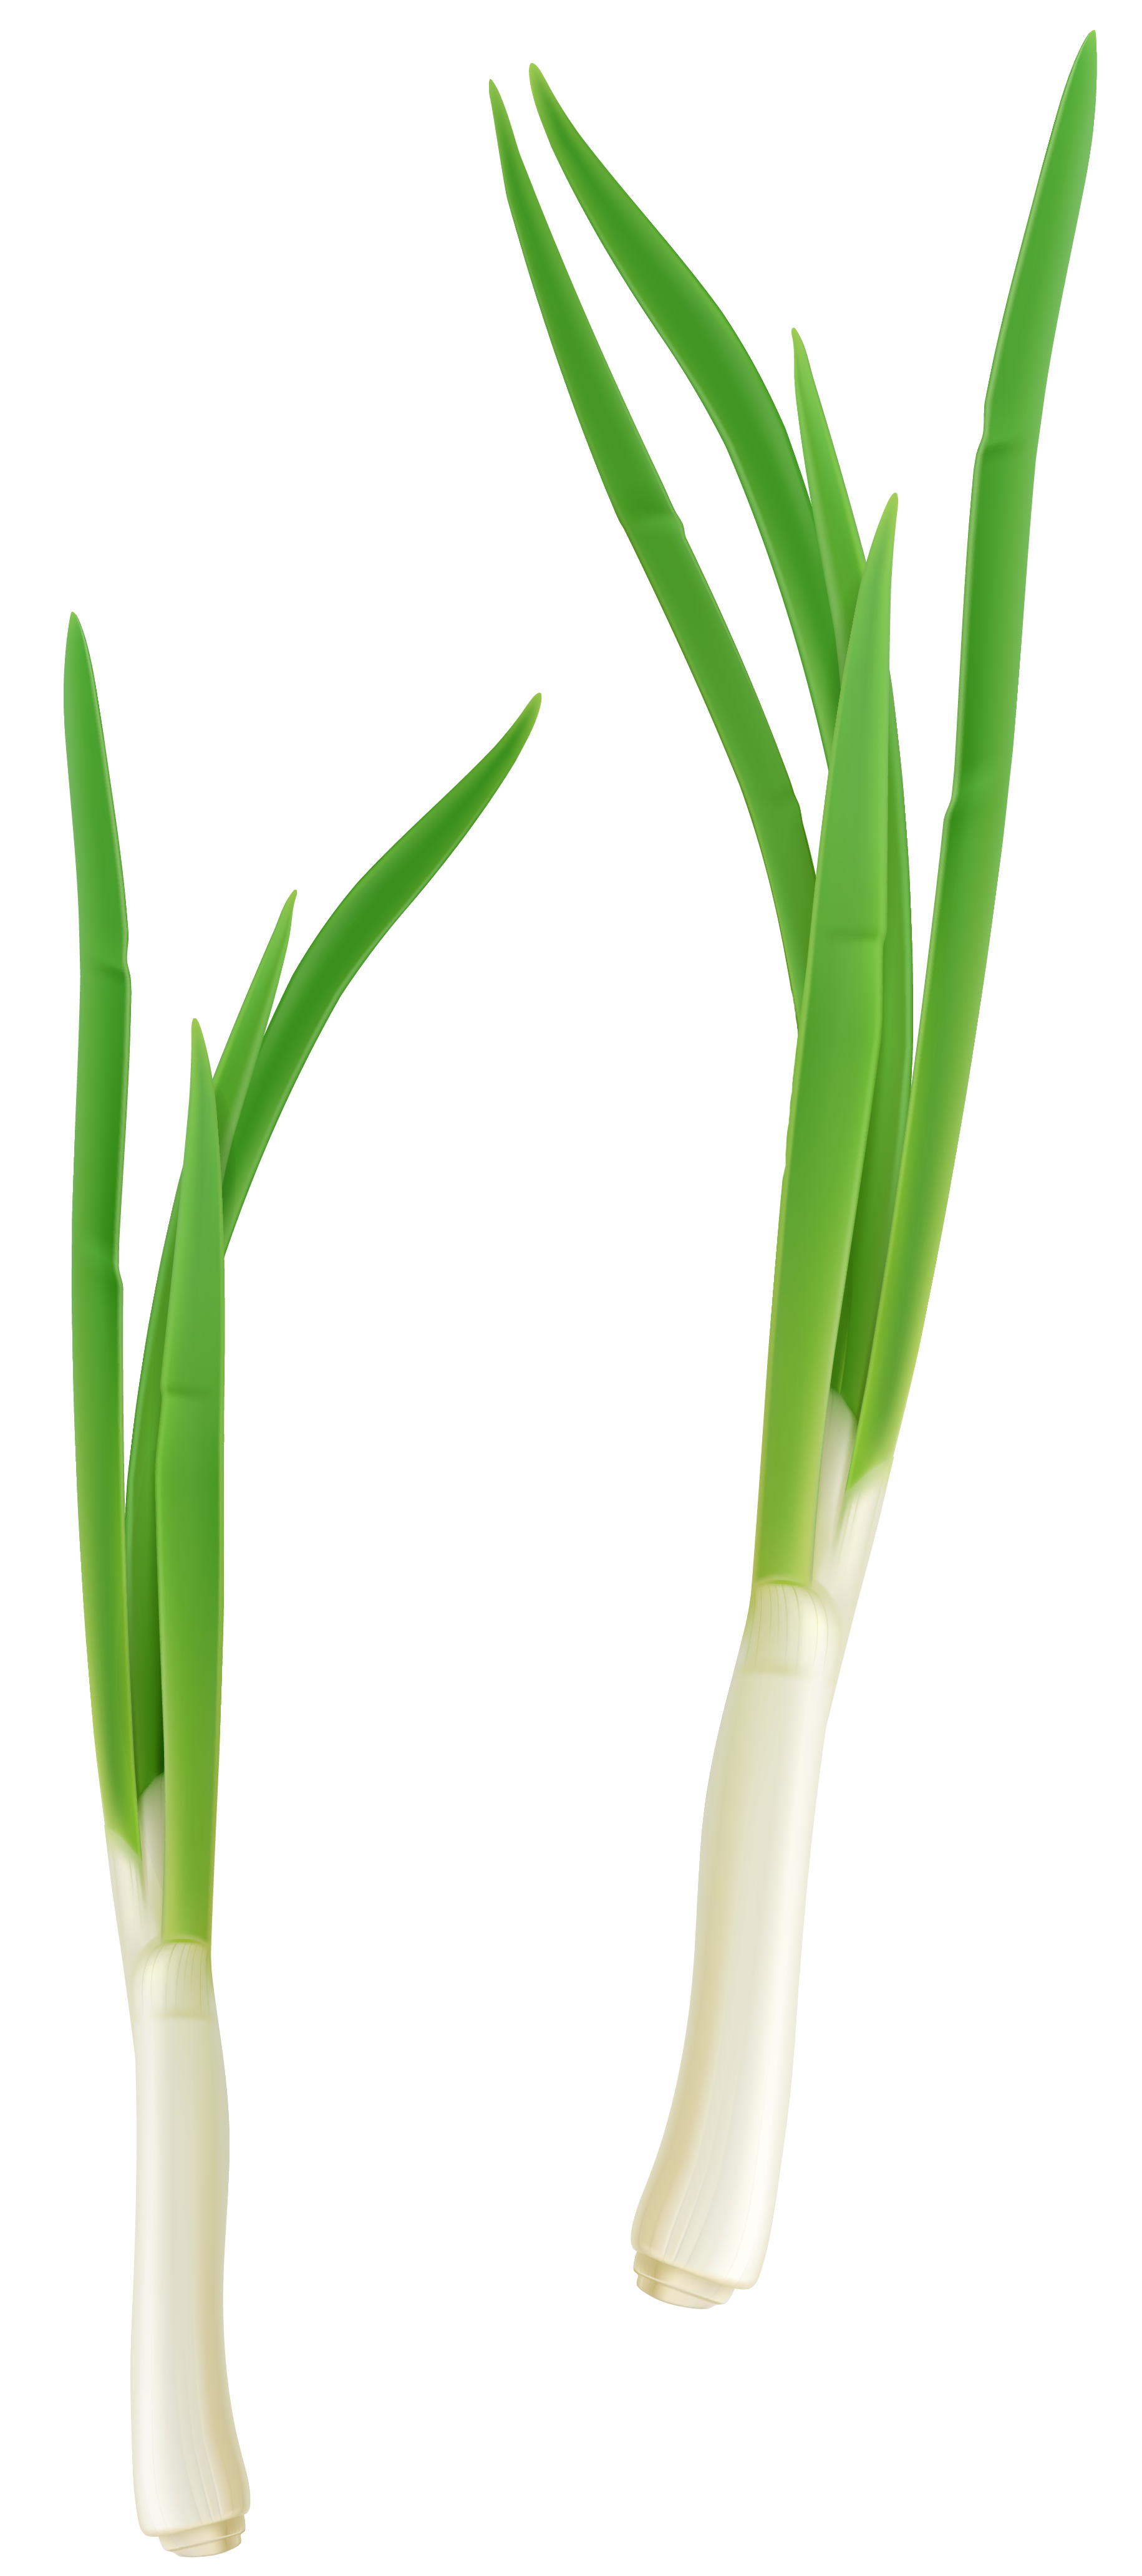 Green fresh onion png. Clipart spring vegetable